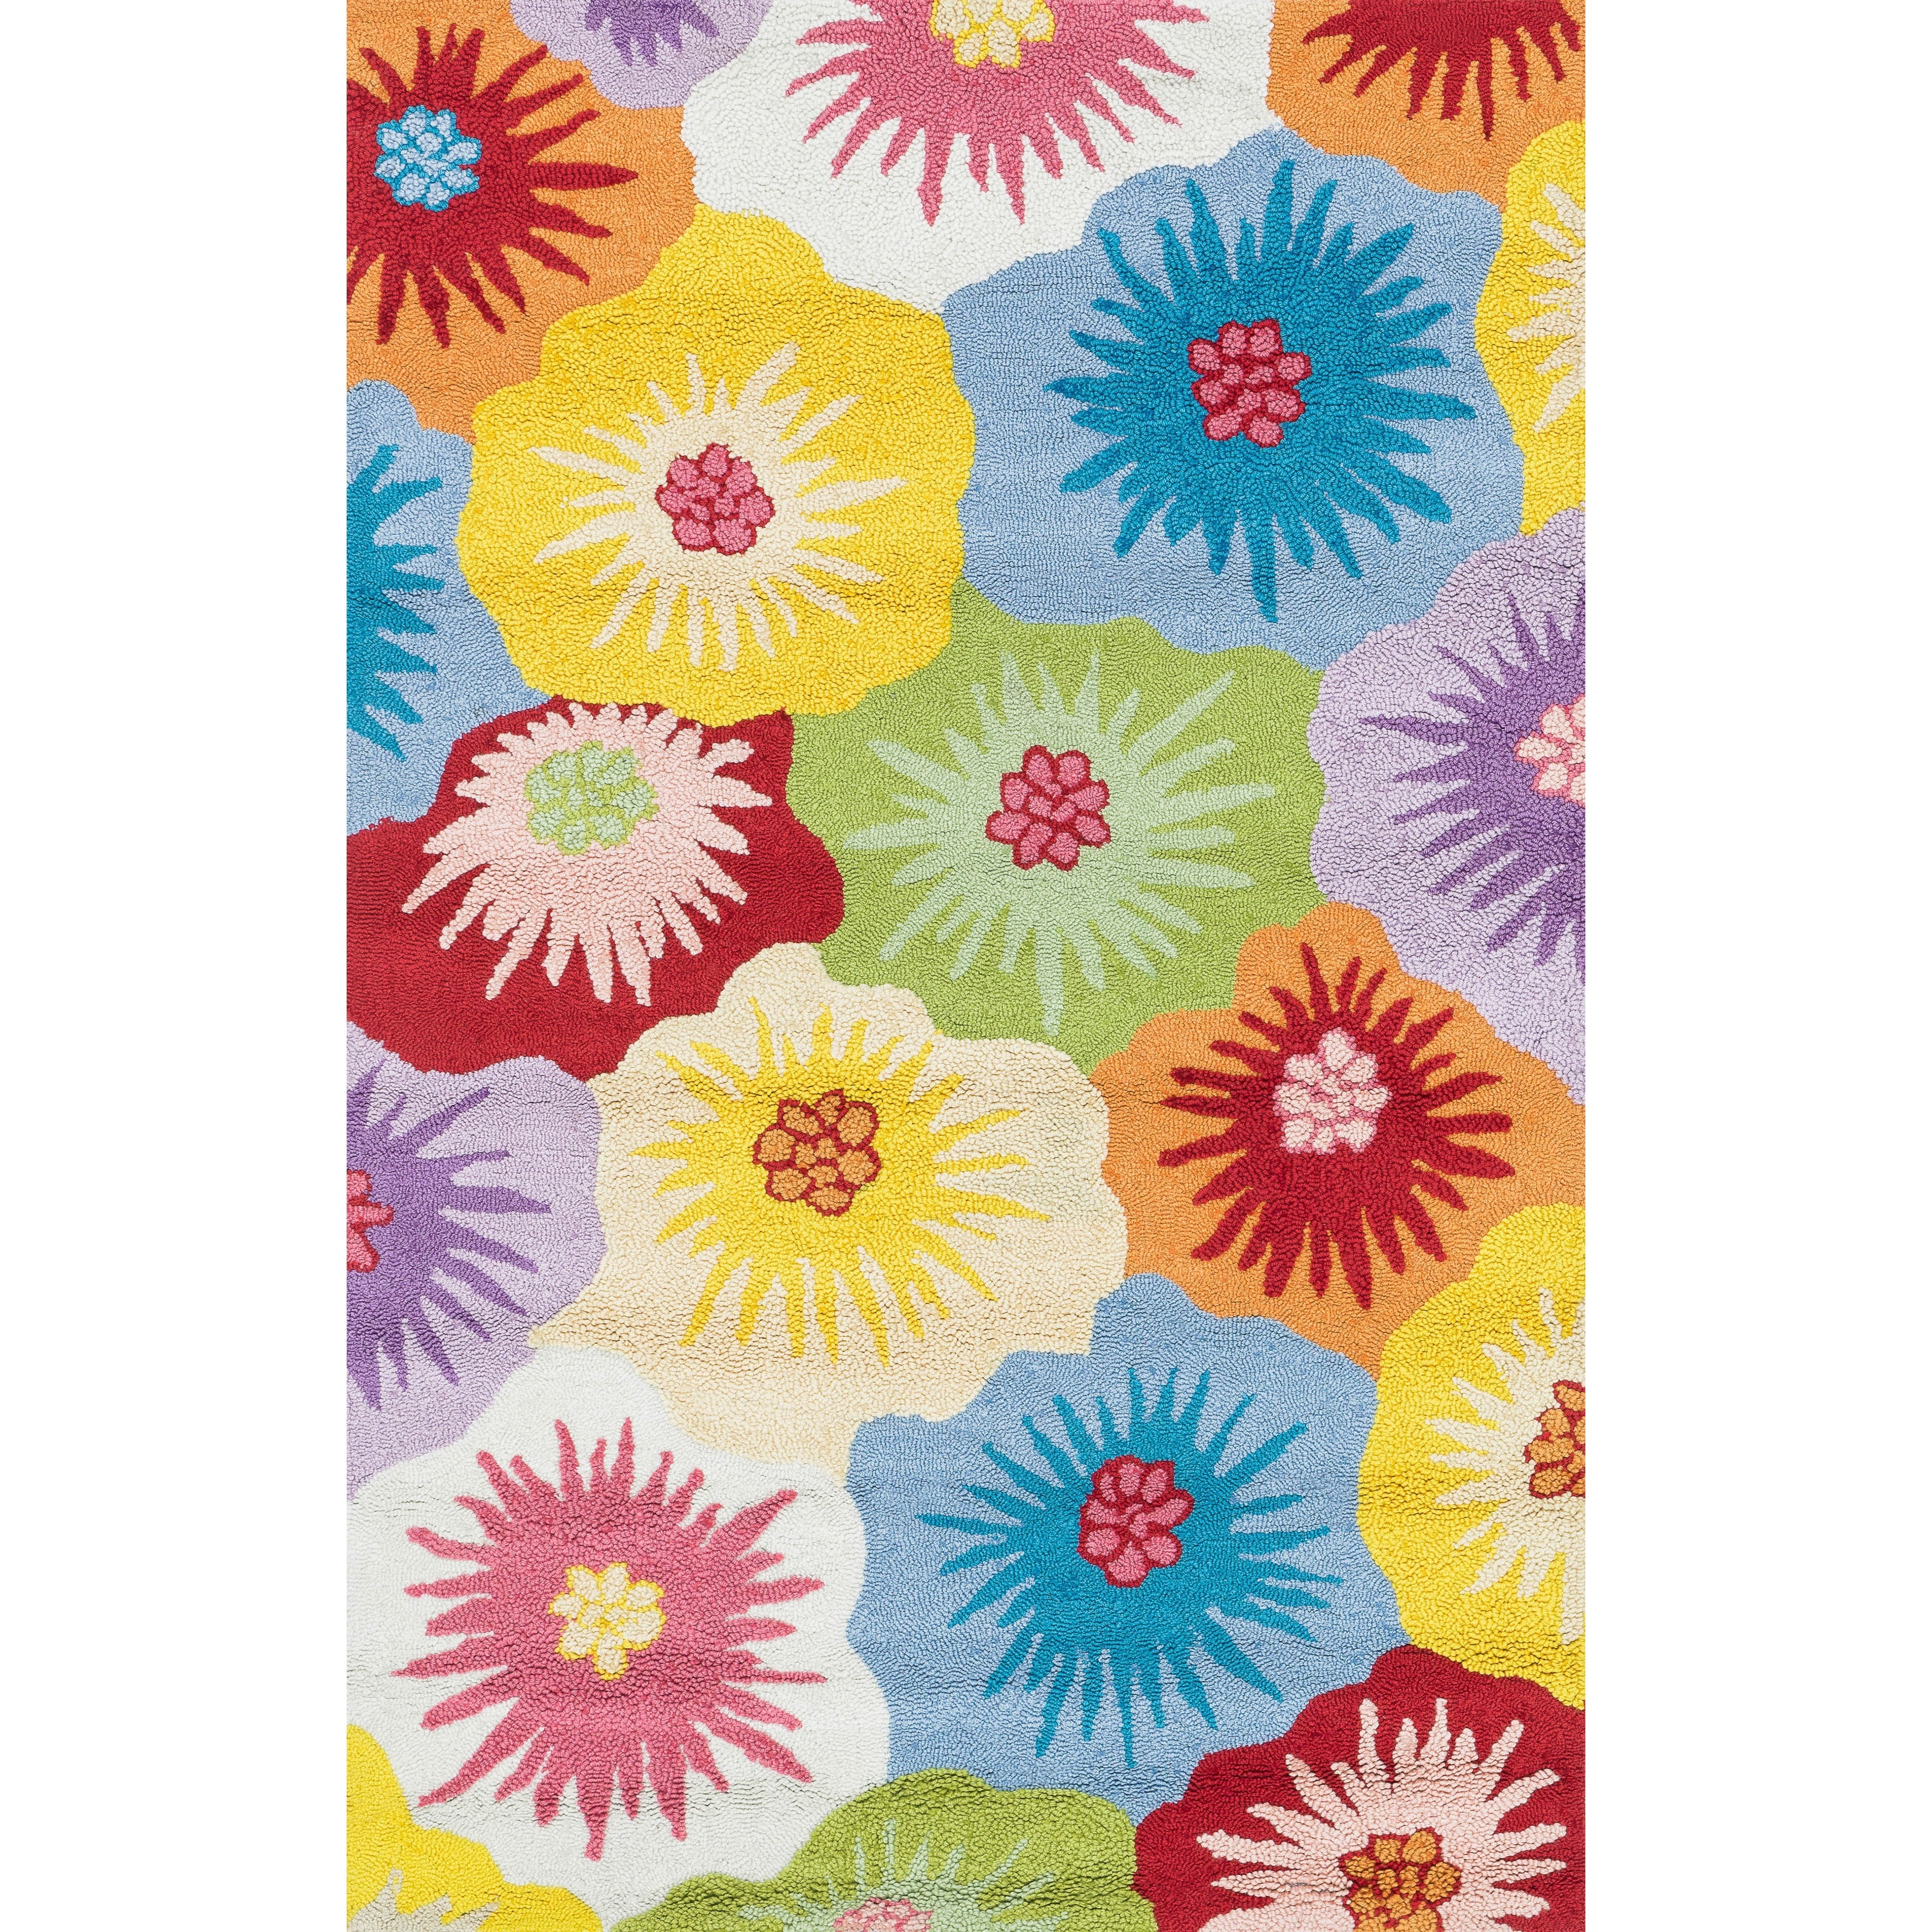 Hand hooked Peony Multicolor Floral Rug (36 X 56)